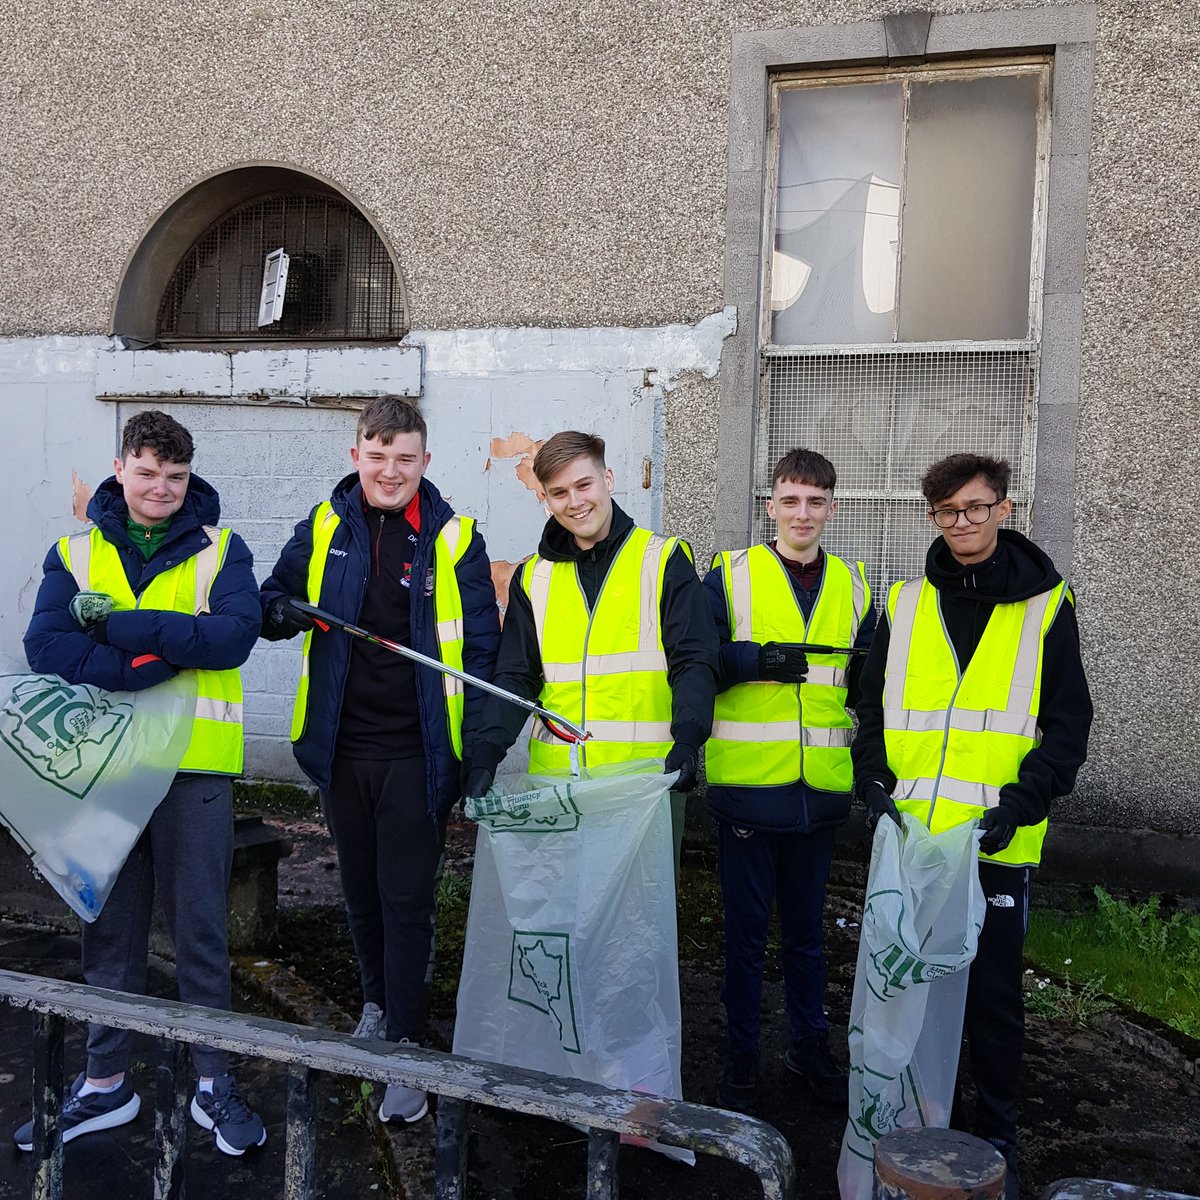 #tlc9 @TLC_Limerick #teamlimerickcleanup #recycle Our Transition Year students were very busy today collecting rubbish and tidying up our school grounds and local area for 'Team Limerick Clean Up' #TLC9